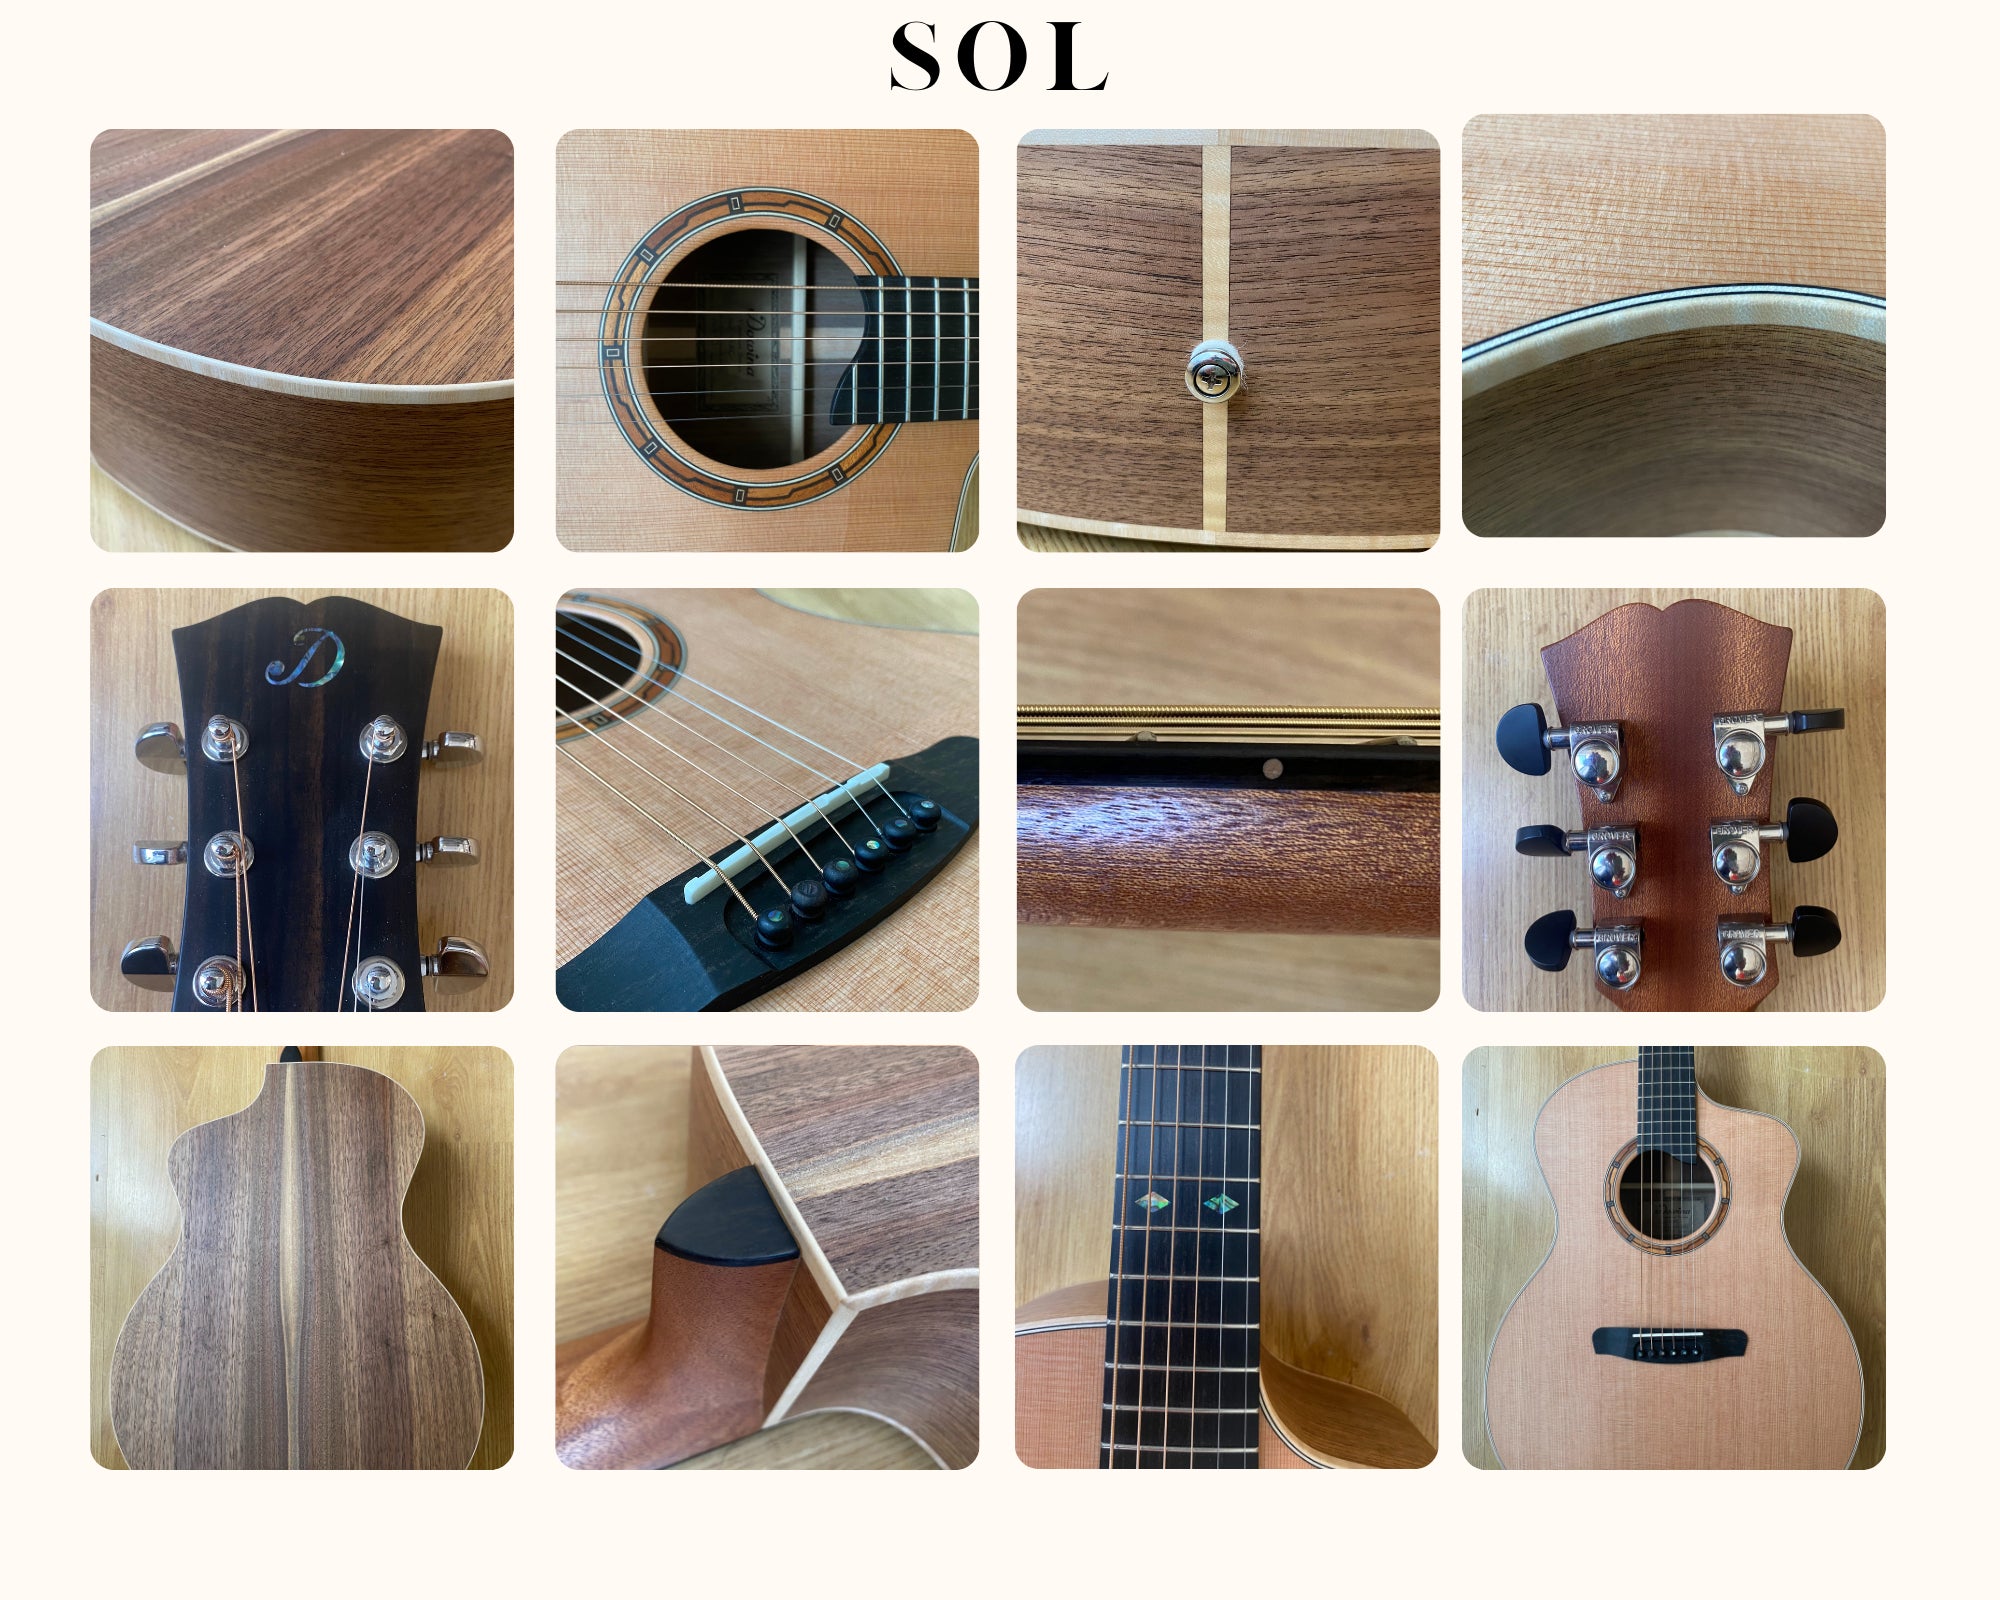 Dowina Walnut (Sol)  BVHE, Acoustic Guitar for sale at Richards Guitars.